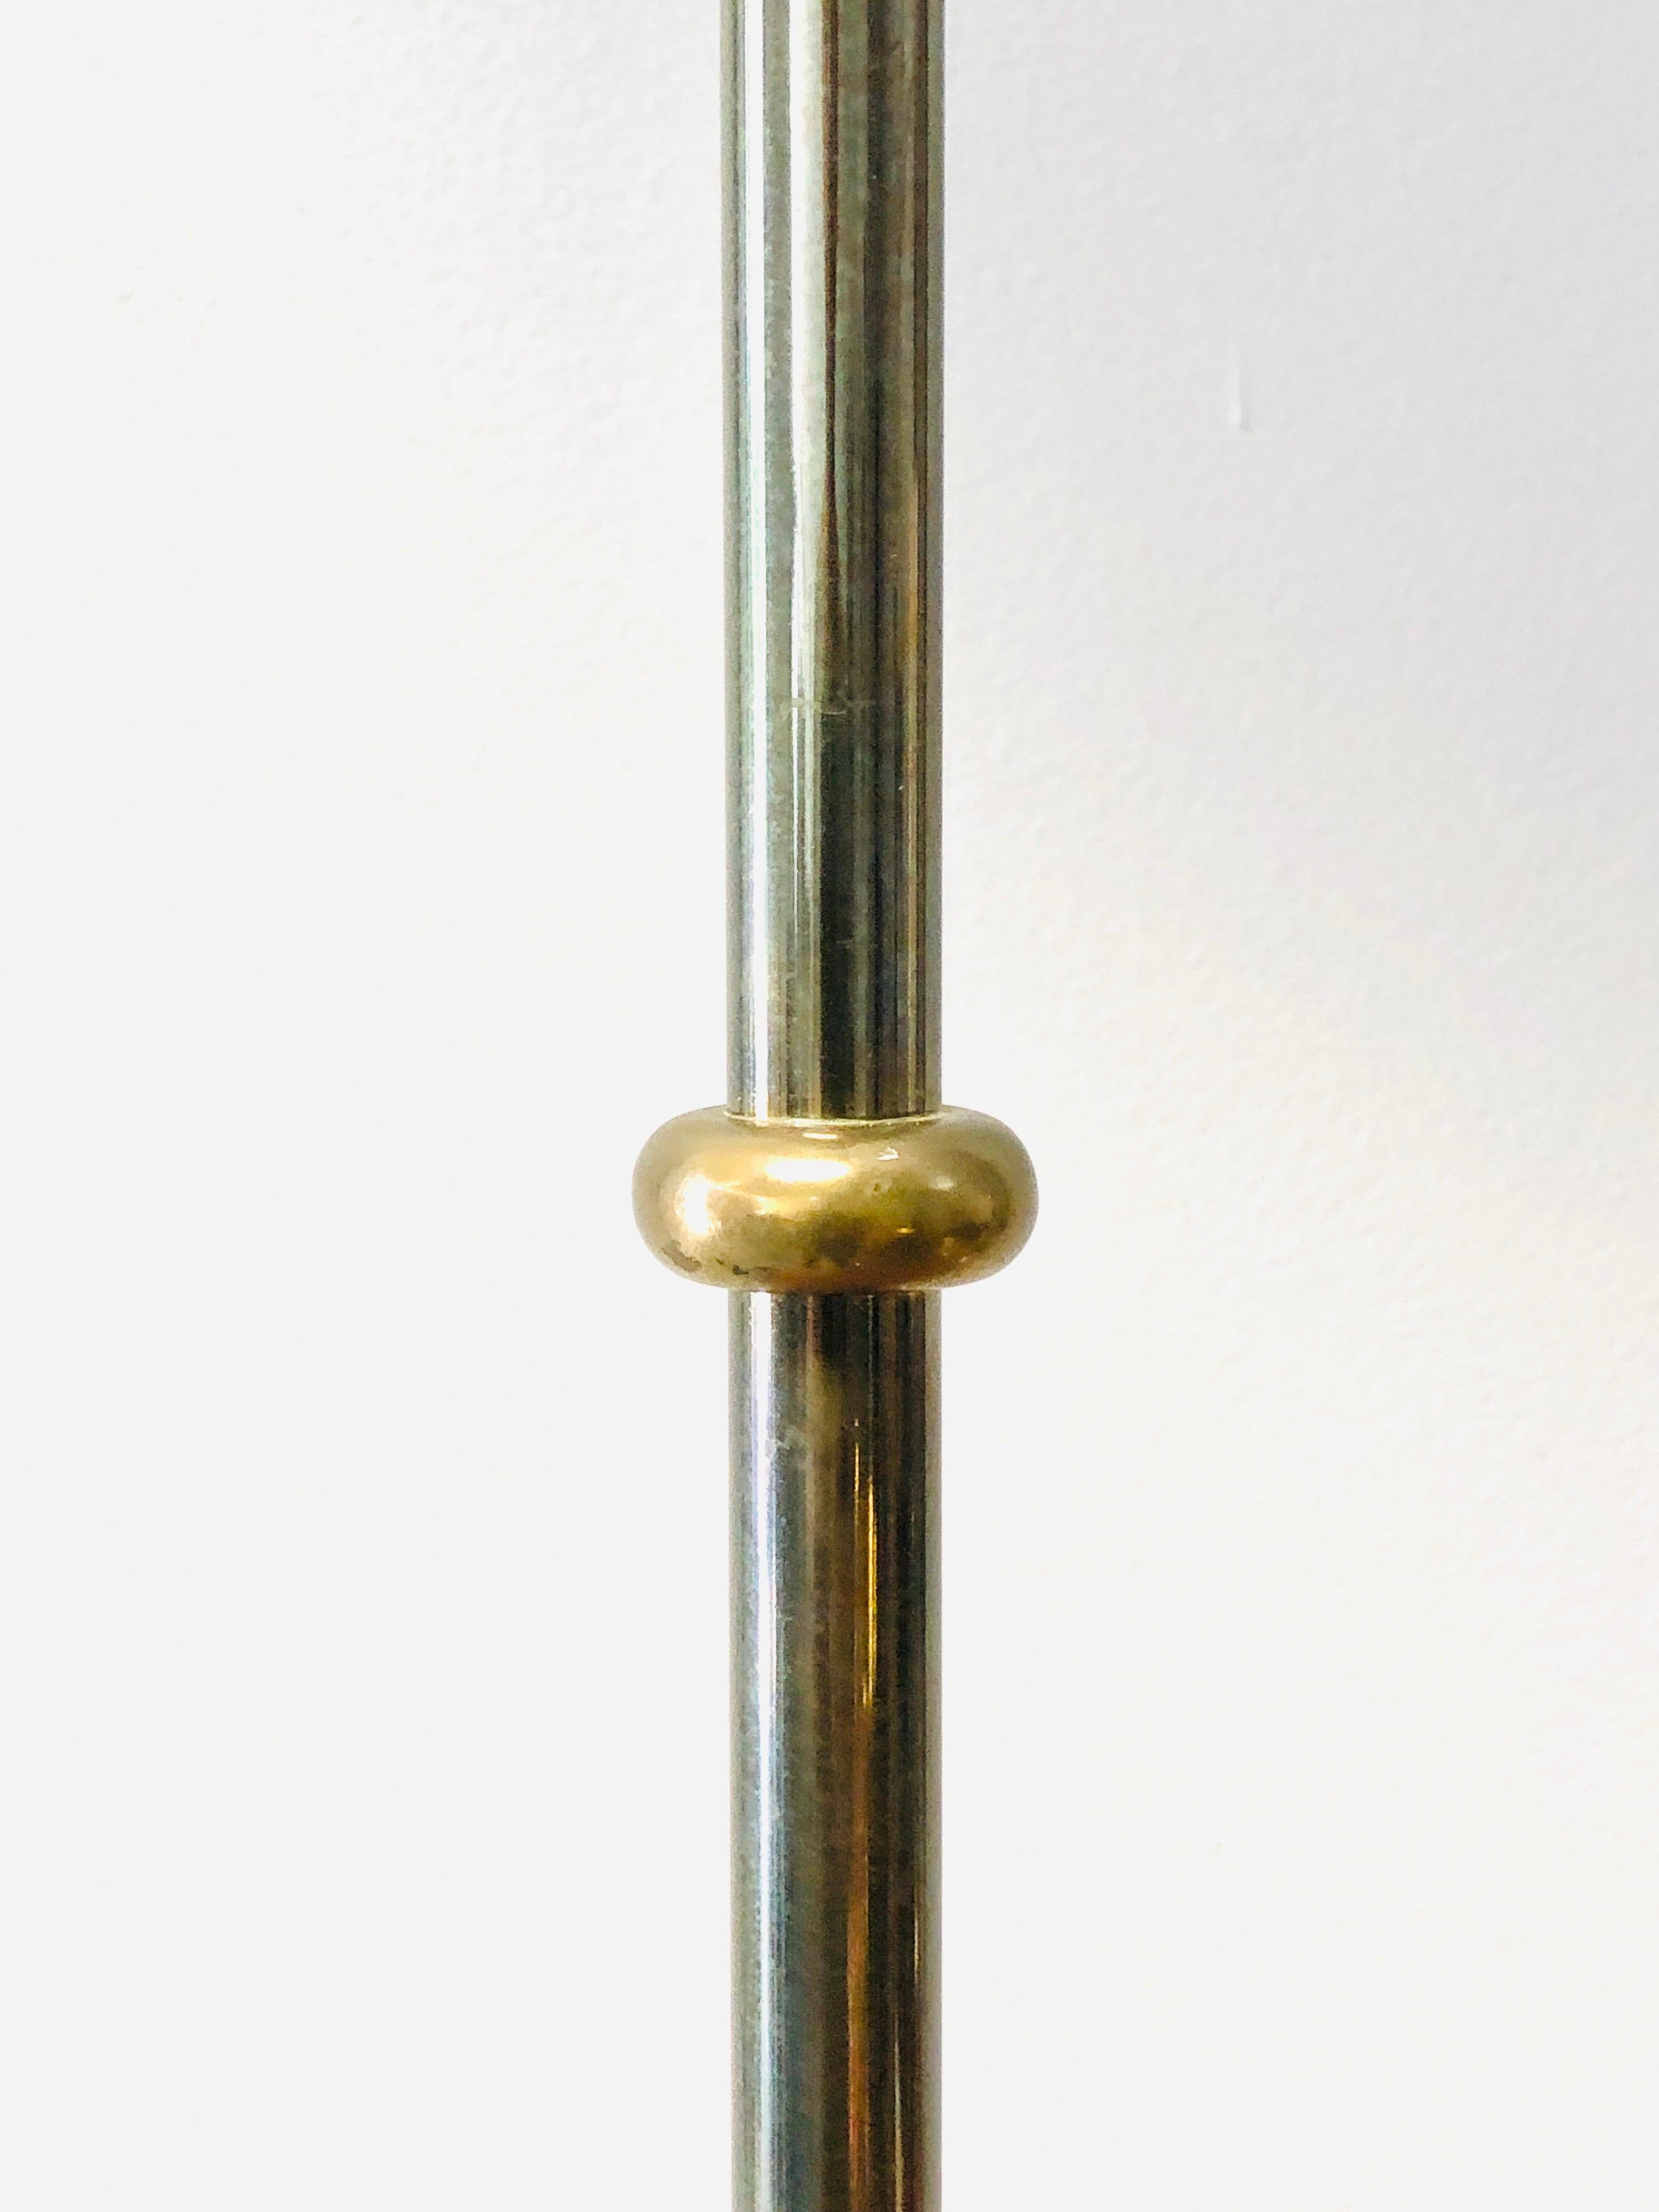 Mid-20th Century Tommi Parzinger Rare Bronze Floor Lamp with Iconic Finial For Sale